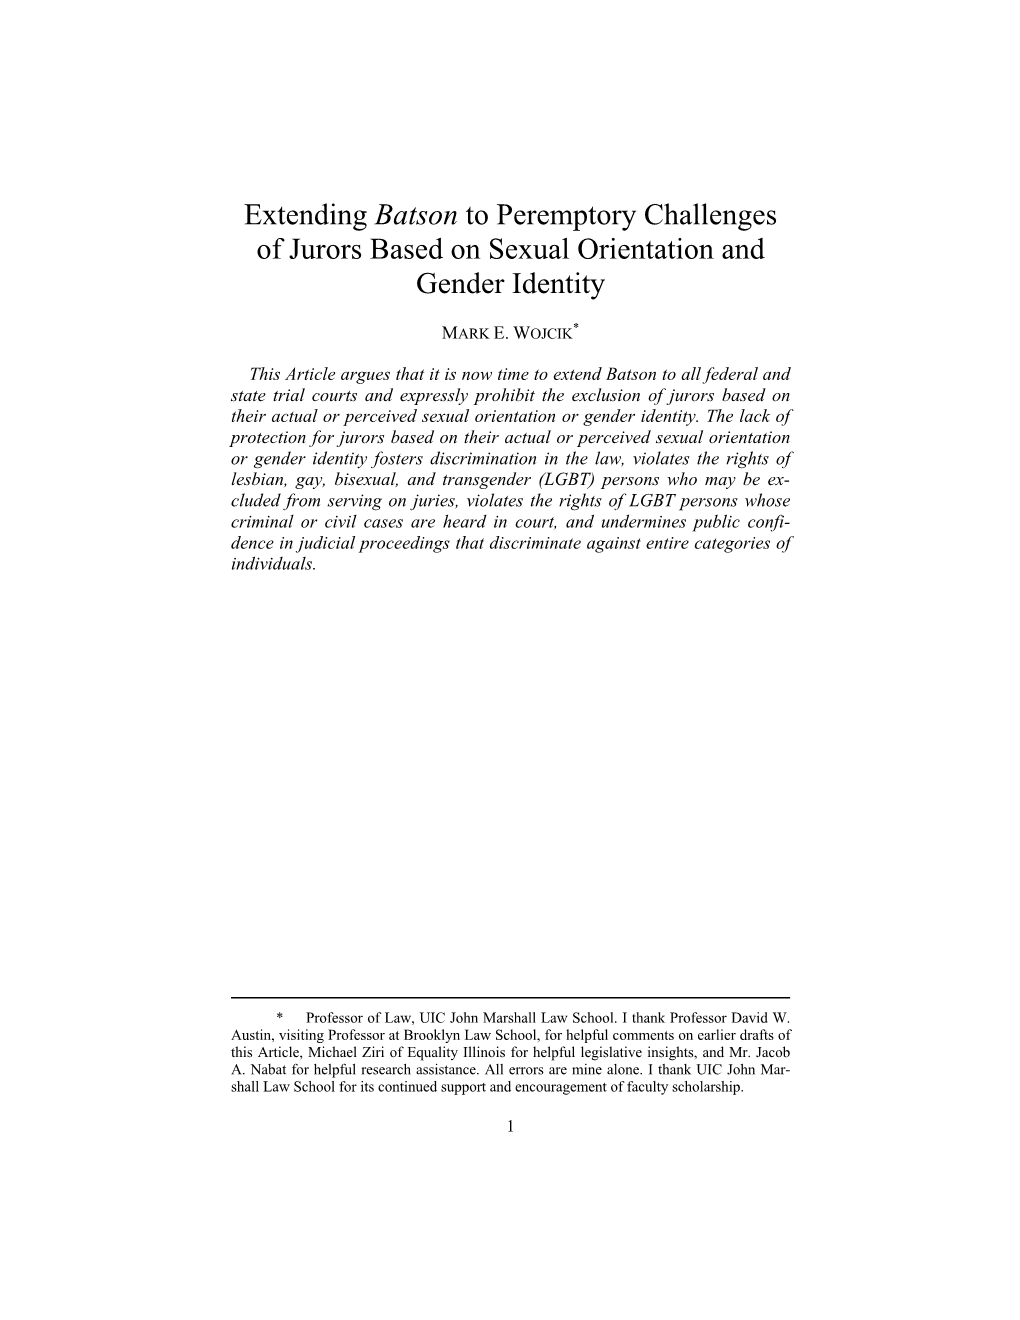 Extending Batson to Peremptory Challenges of Jurors Based on Sexual Orientation and Gender Identity